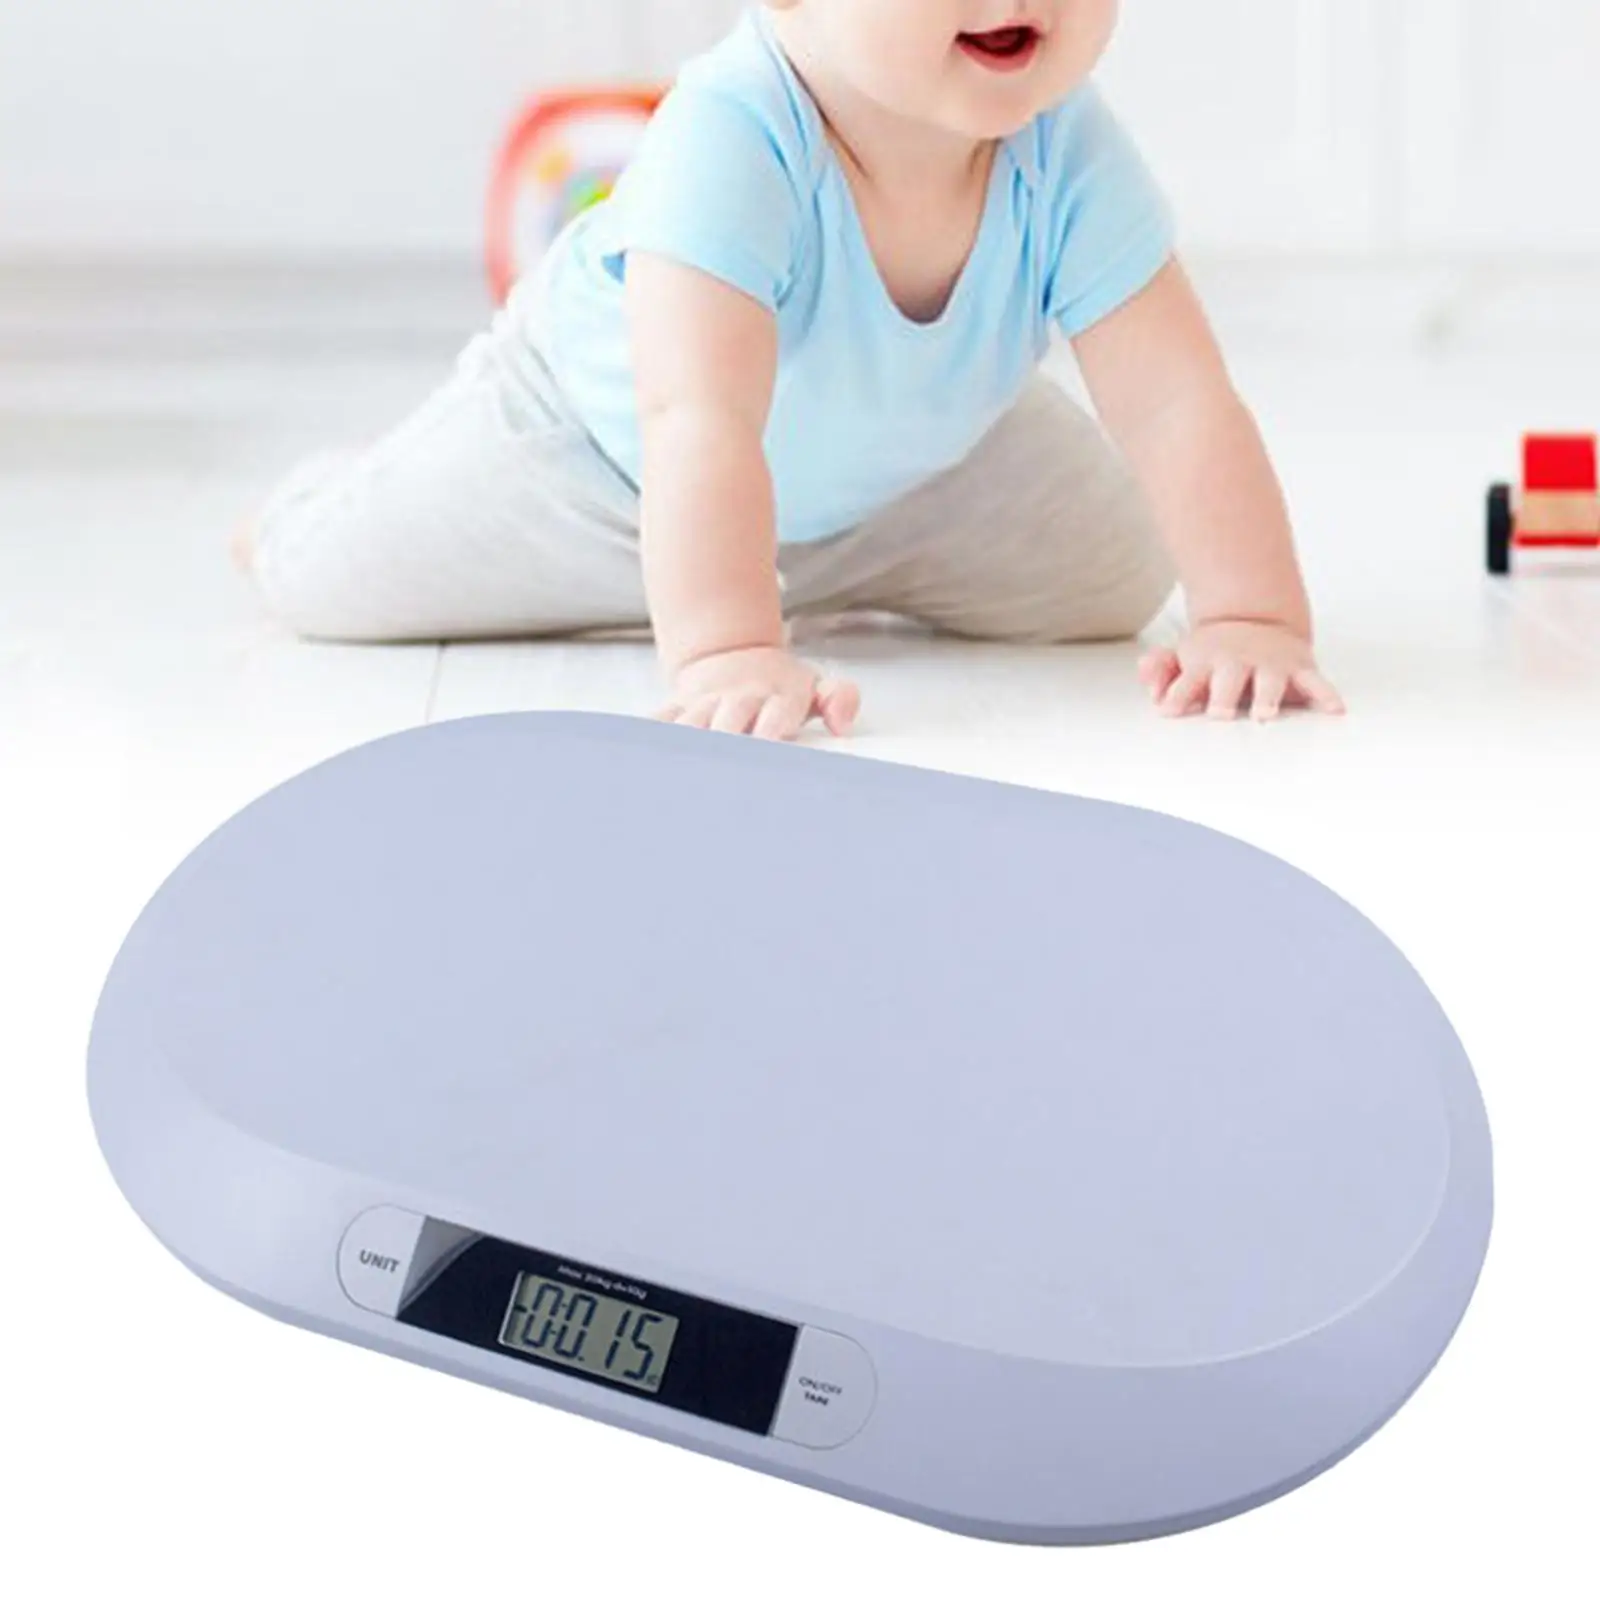 Digital Infant Scale 44.1lb Capacity Portable Comfort Multifunction Accurate Health Scale for Puppy Animals Cats Toddlers